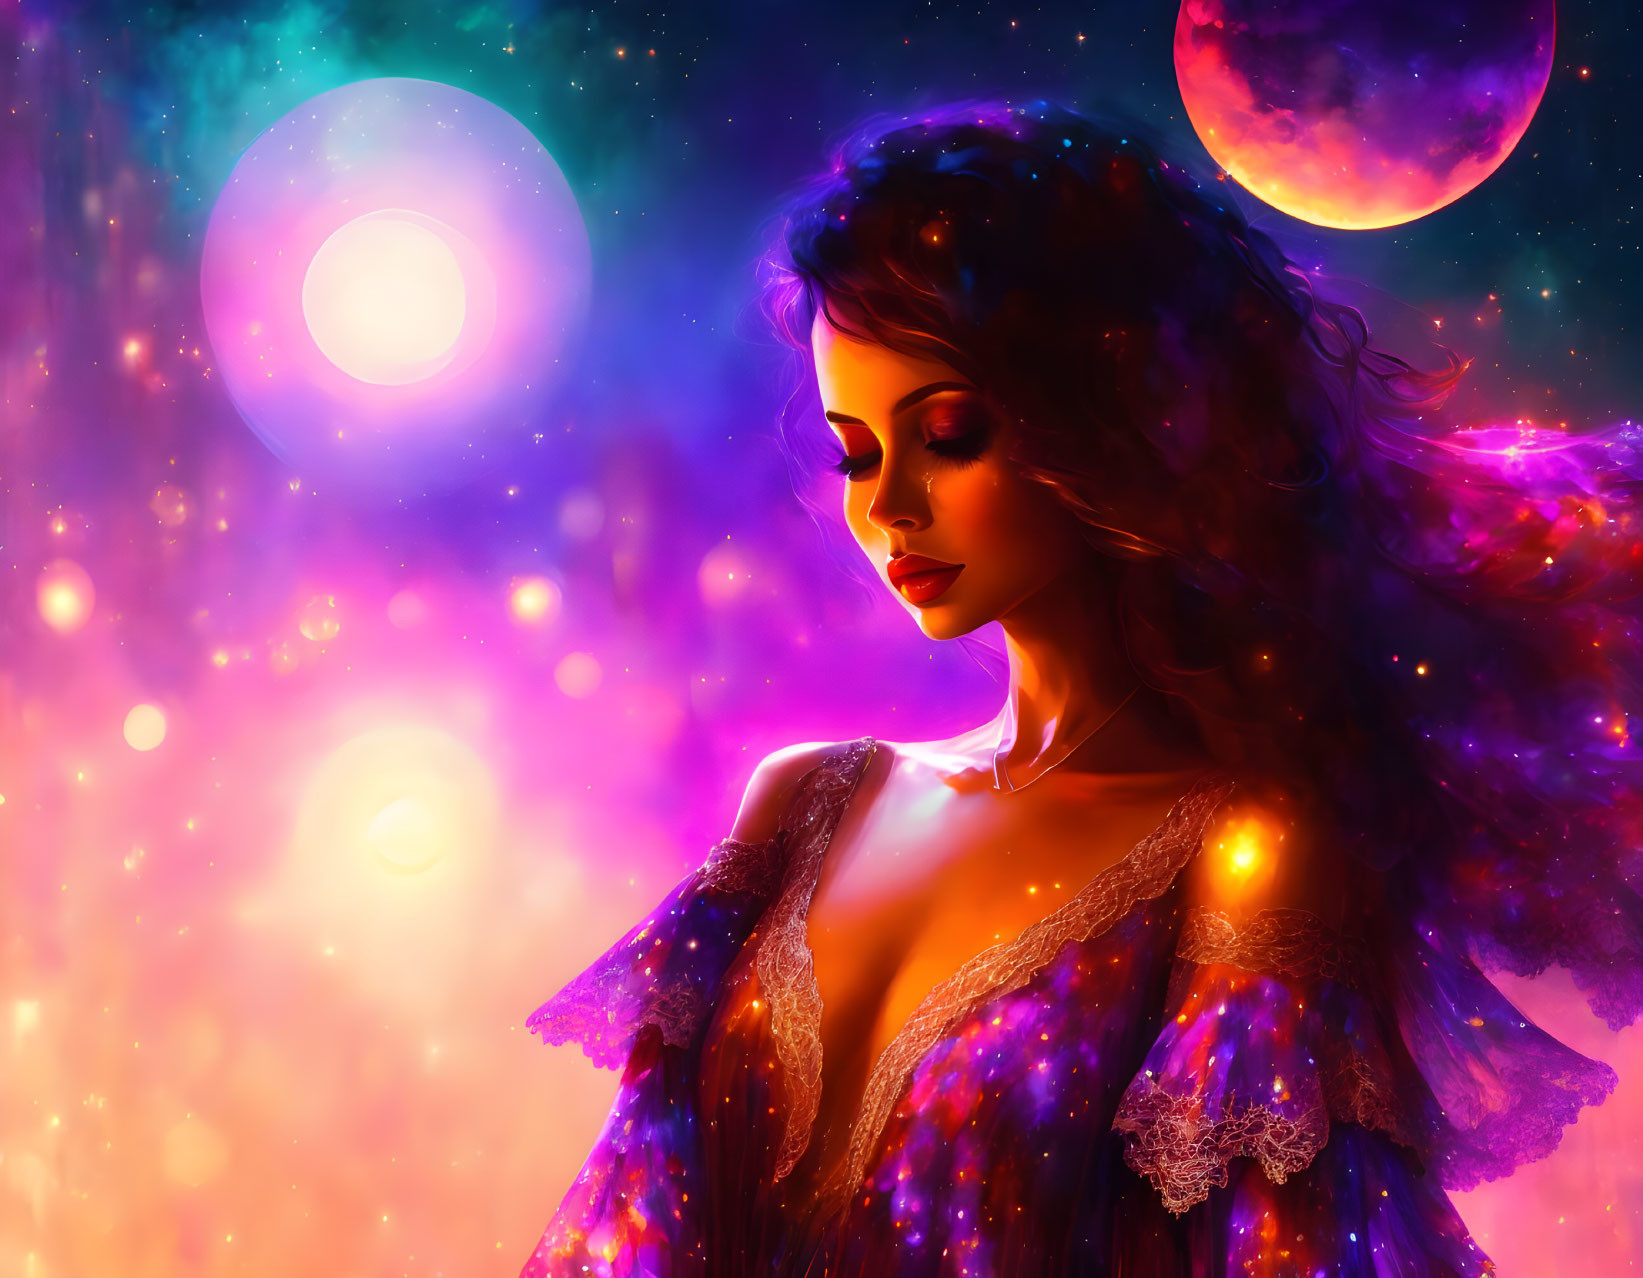 Digital artwork of woman in galaxy-themed attire with flowing hair against cosmic backdrop